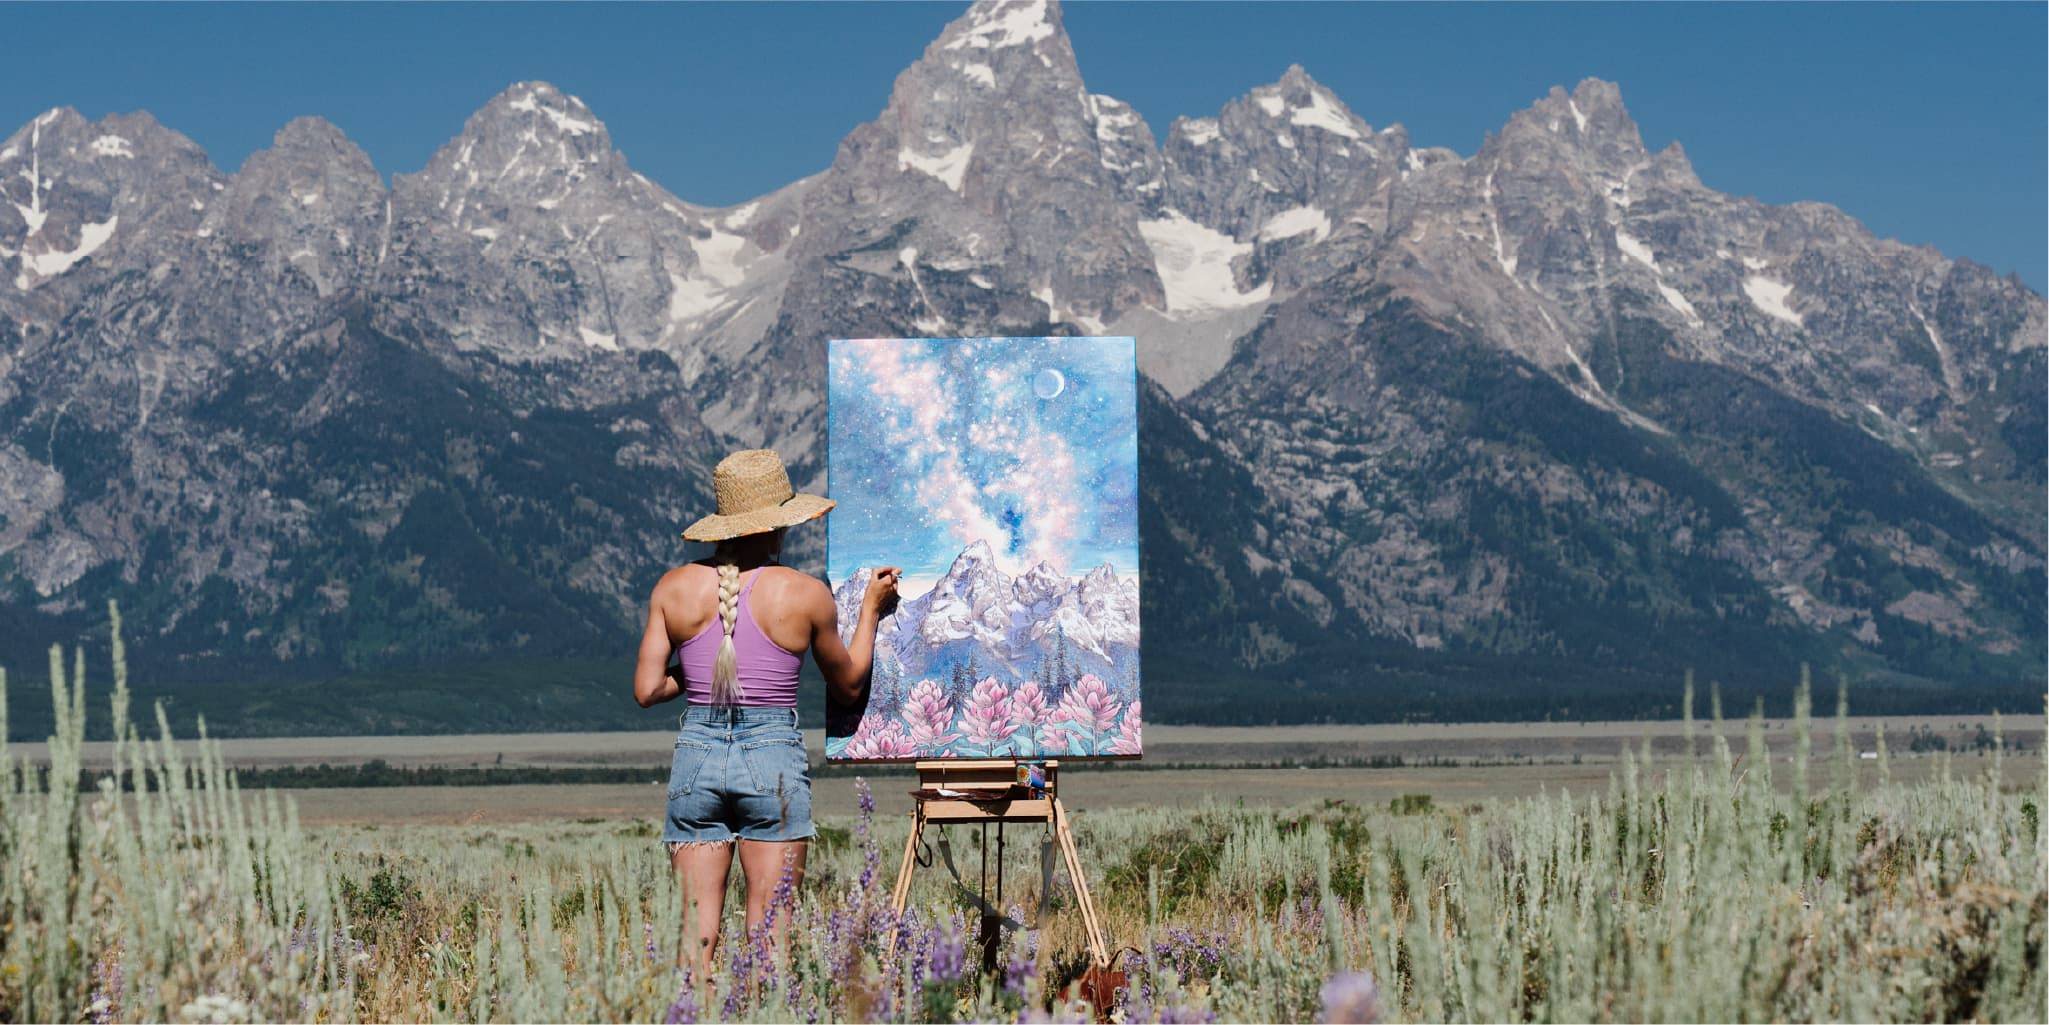 Rachel Pohl painting on a canvas in front of the teton mountains